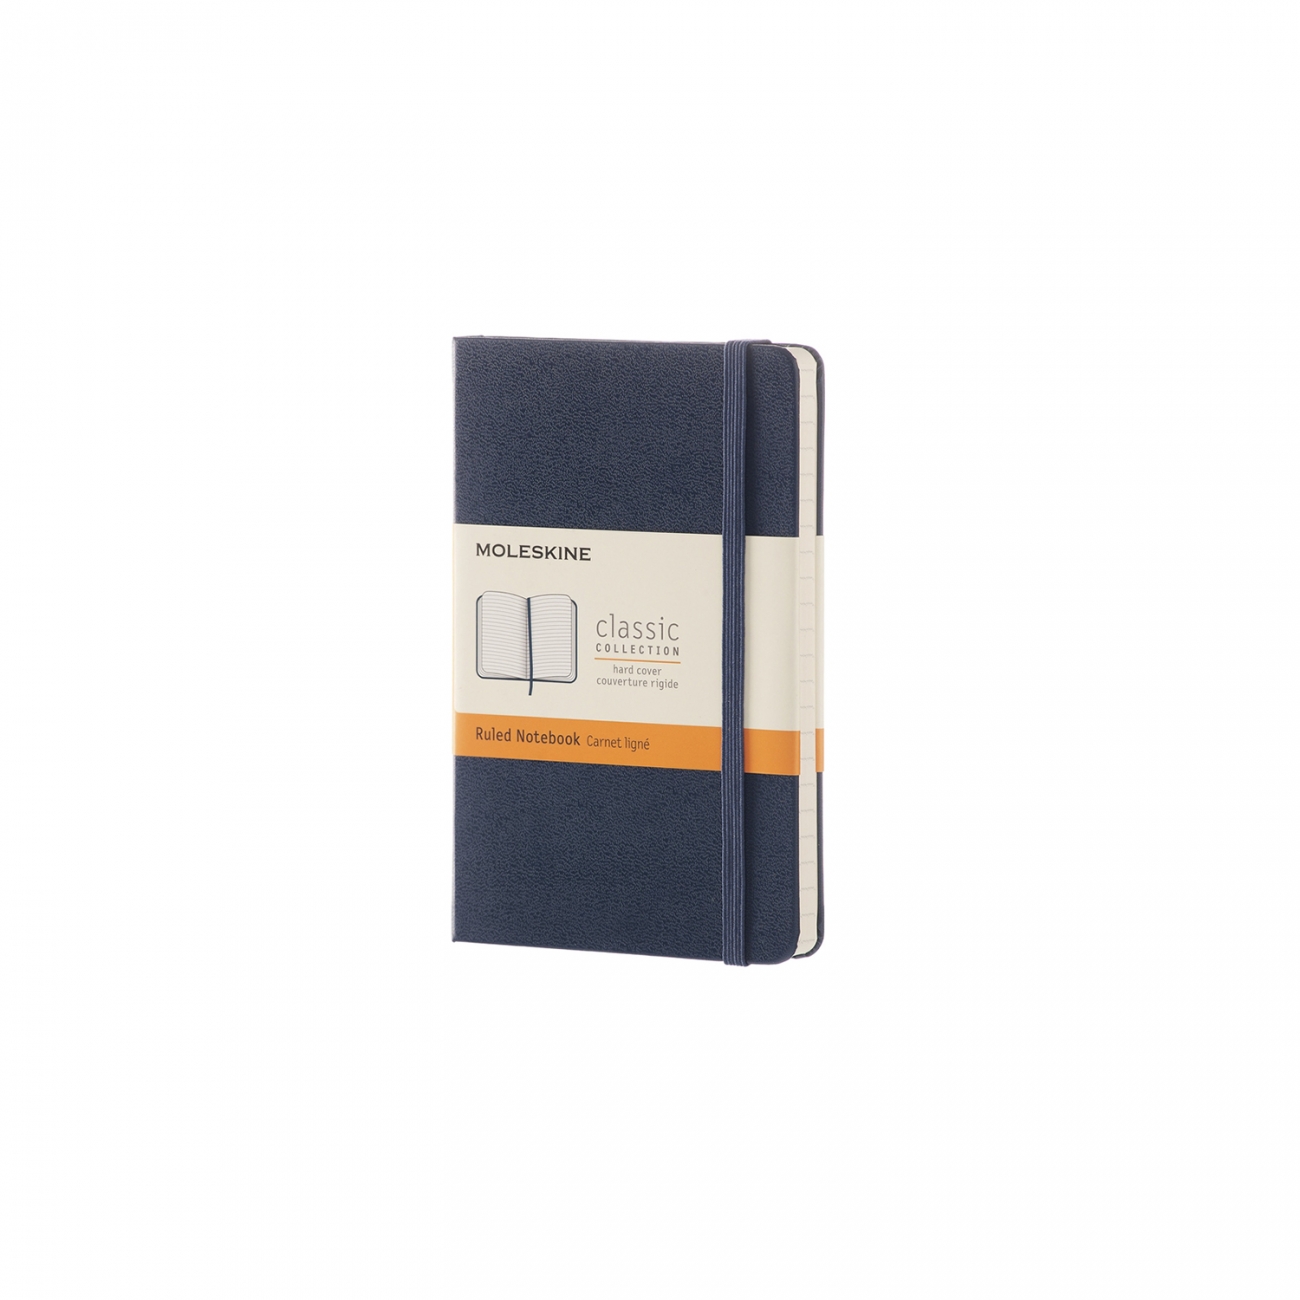 CLASSIC HARD COVER NOTEBOOK - RULED - POCKET - SAPPHIRE BLUE